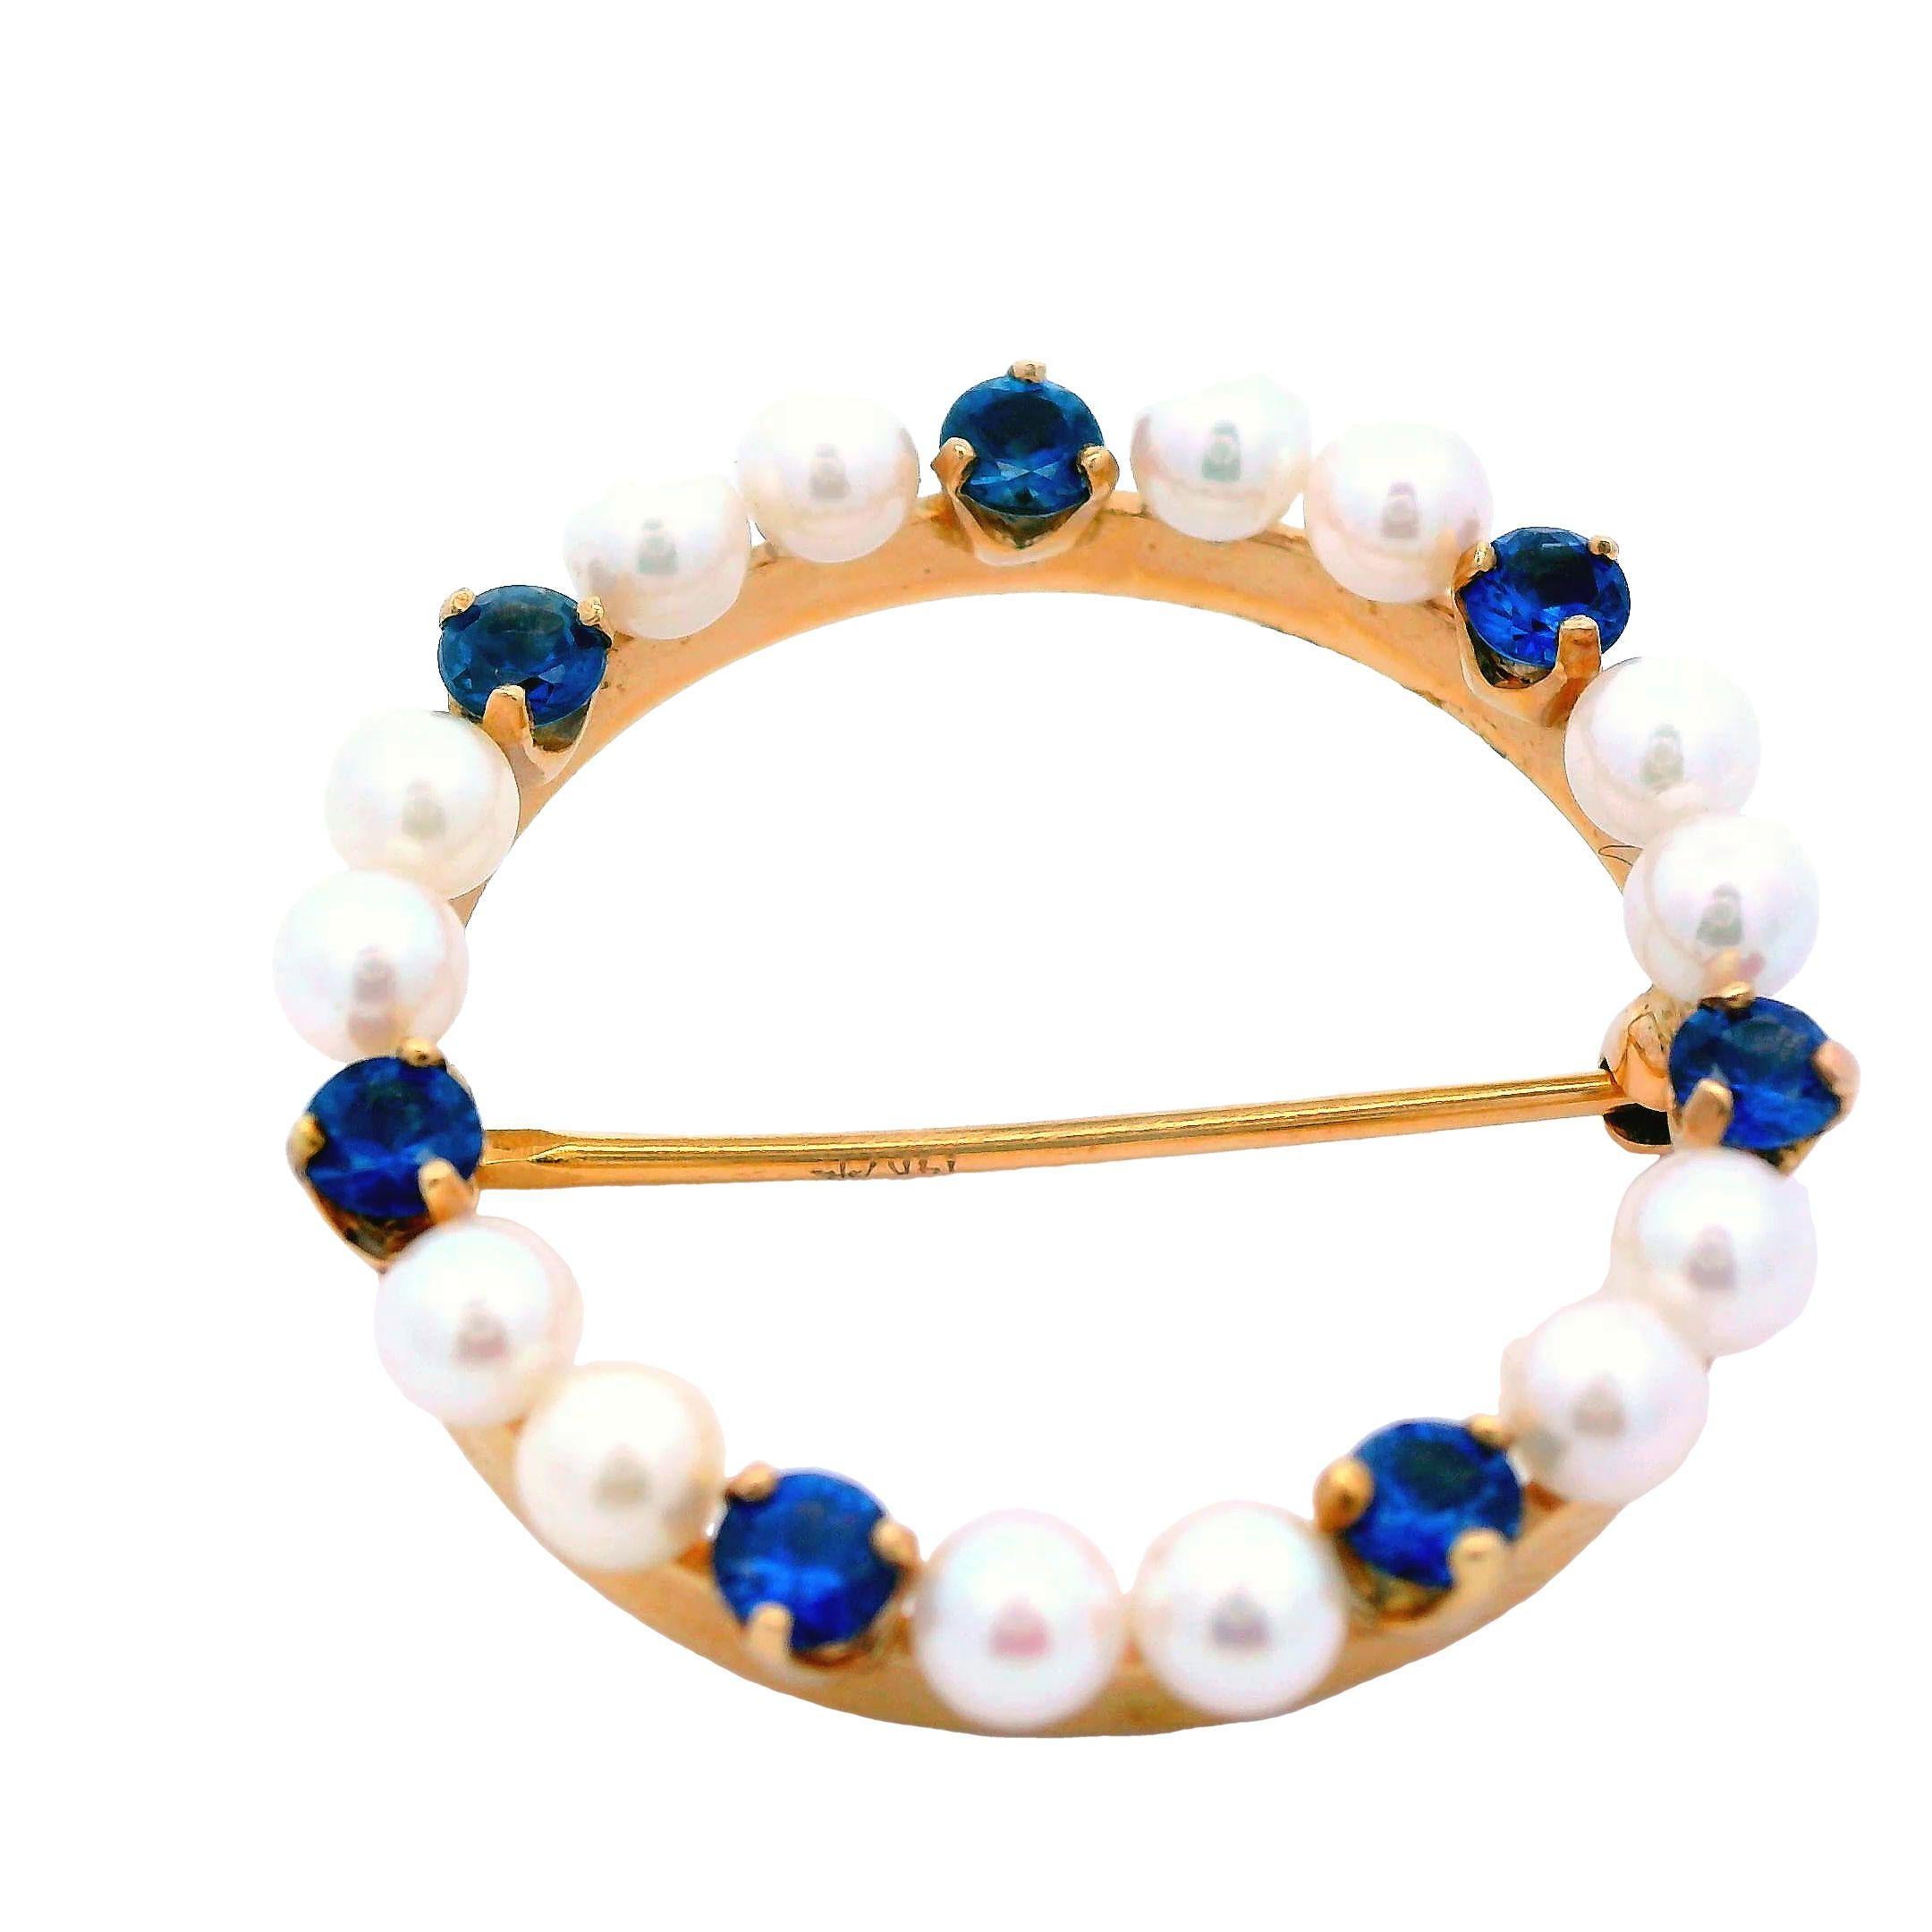 This beautiful Craig Drake royal blue natural pin is made in 14k yellow gold and features both sapphire and pearls. The pins circle design is indicative of the contemporary movement and allows the pin to better boast the white creamy pearls and rich